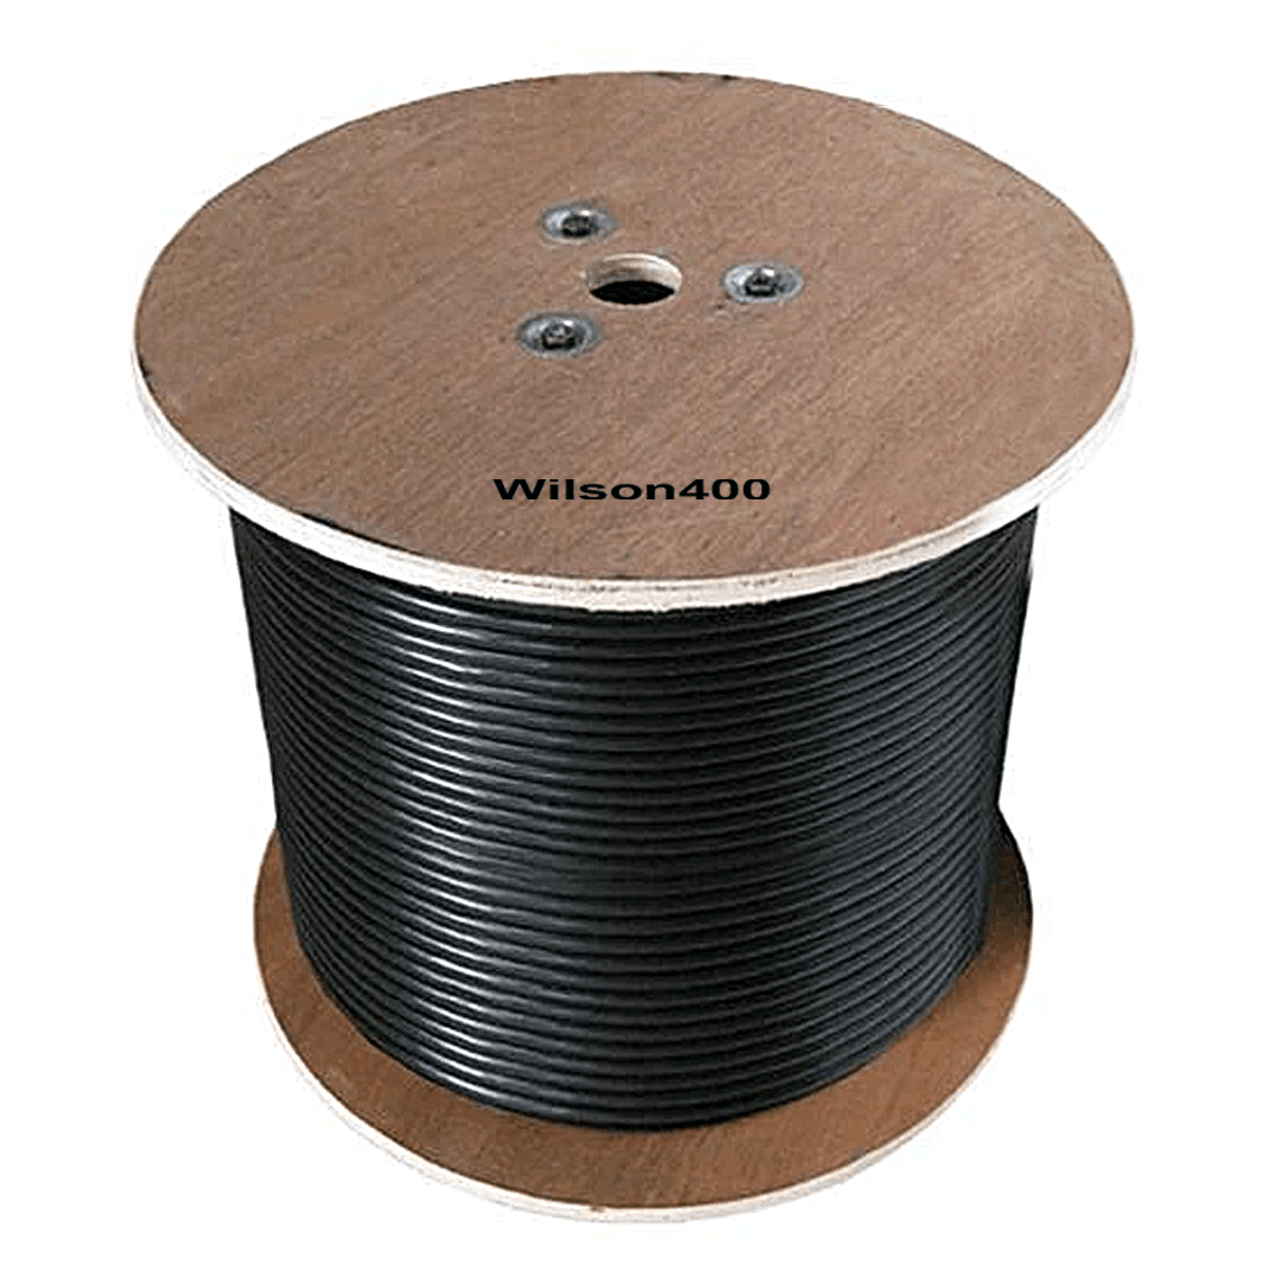 https://cdn11.bigcommerce.com/s-bf3bb/images/stencil/1280x1280/products/34/8861/wilson-400-1000ft-spool-400-coax-cable-n-male-952301__92411.1709921382.png?c=2